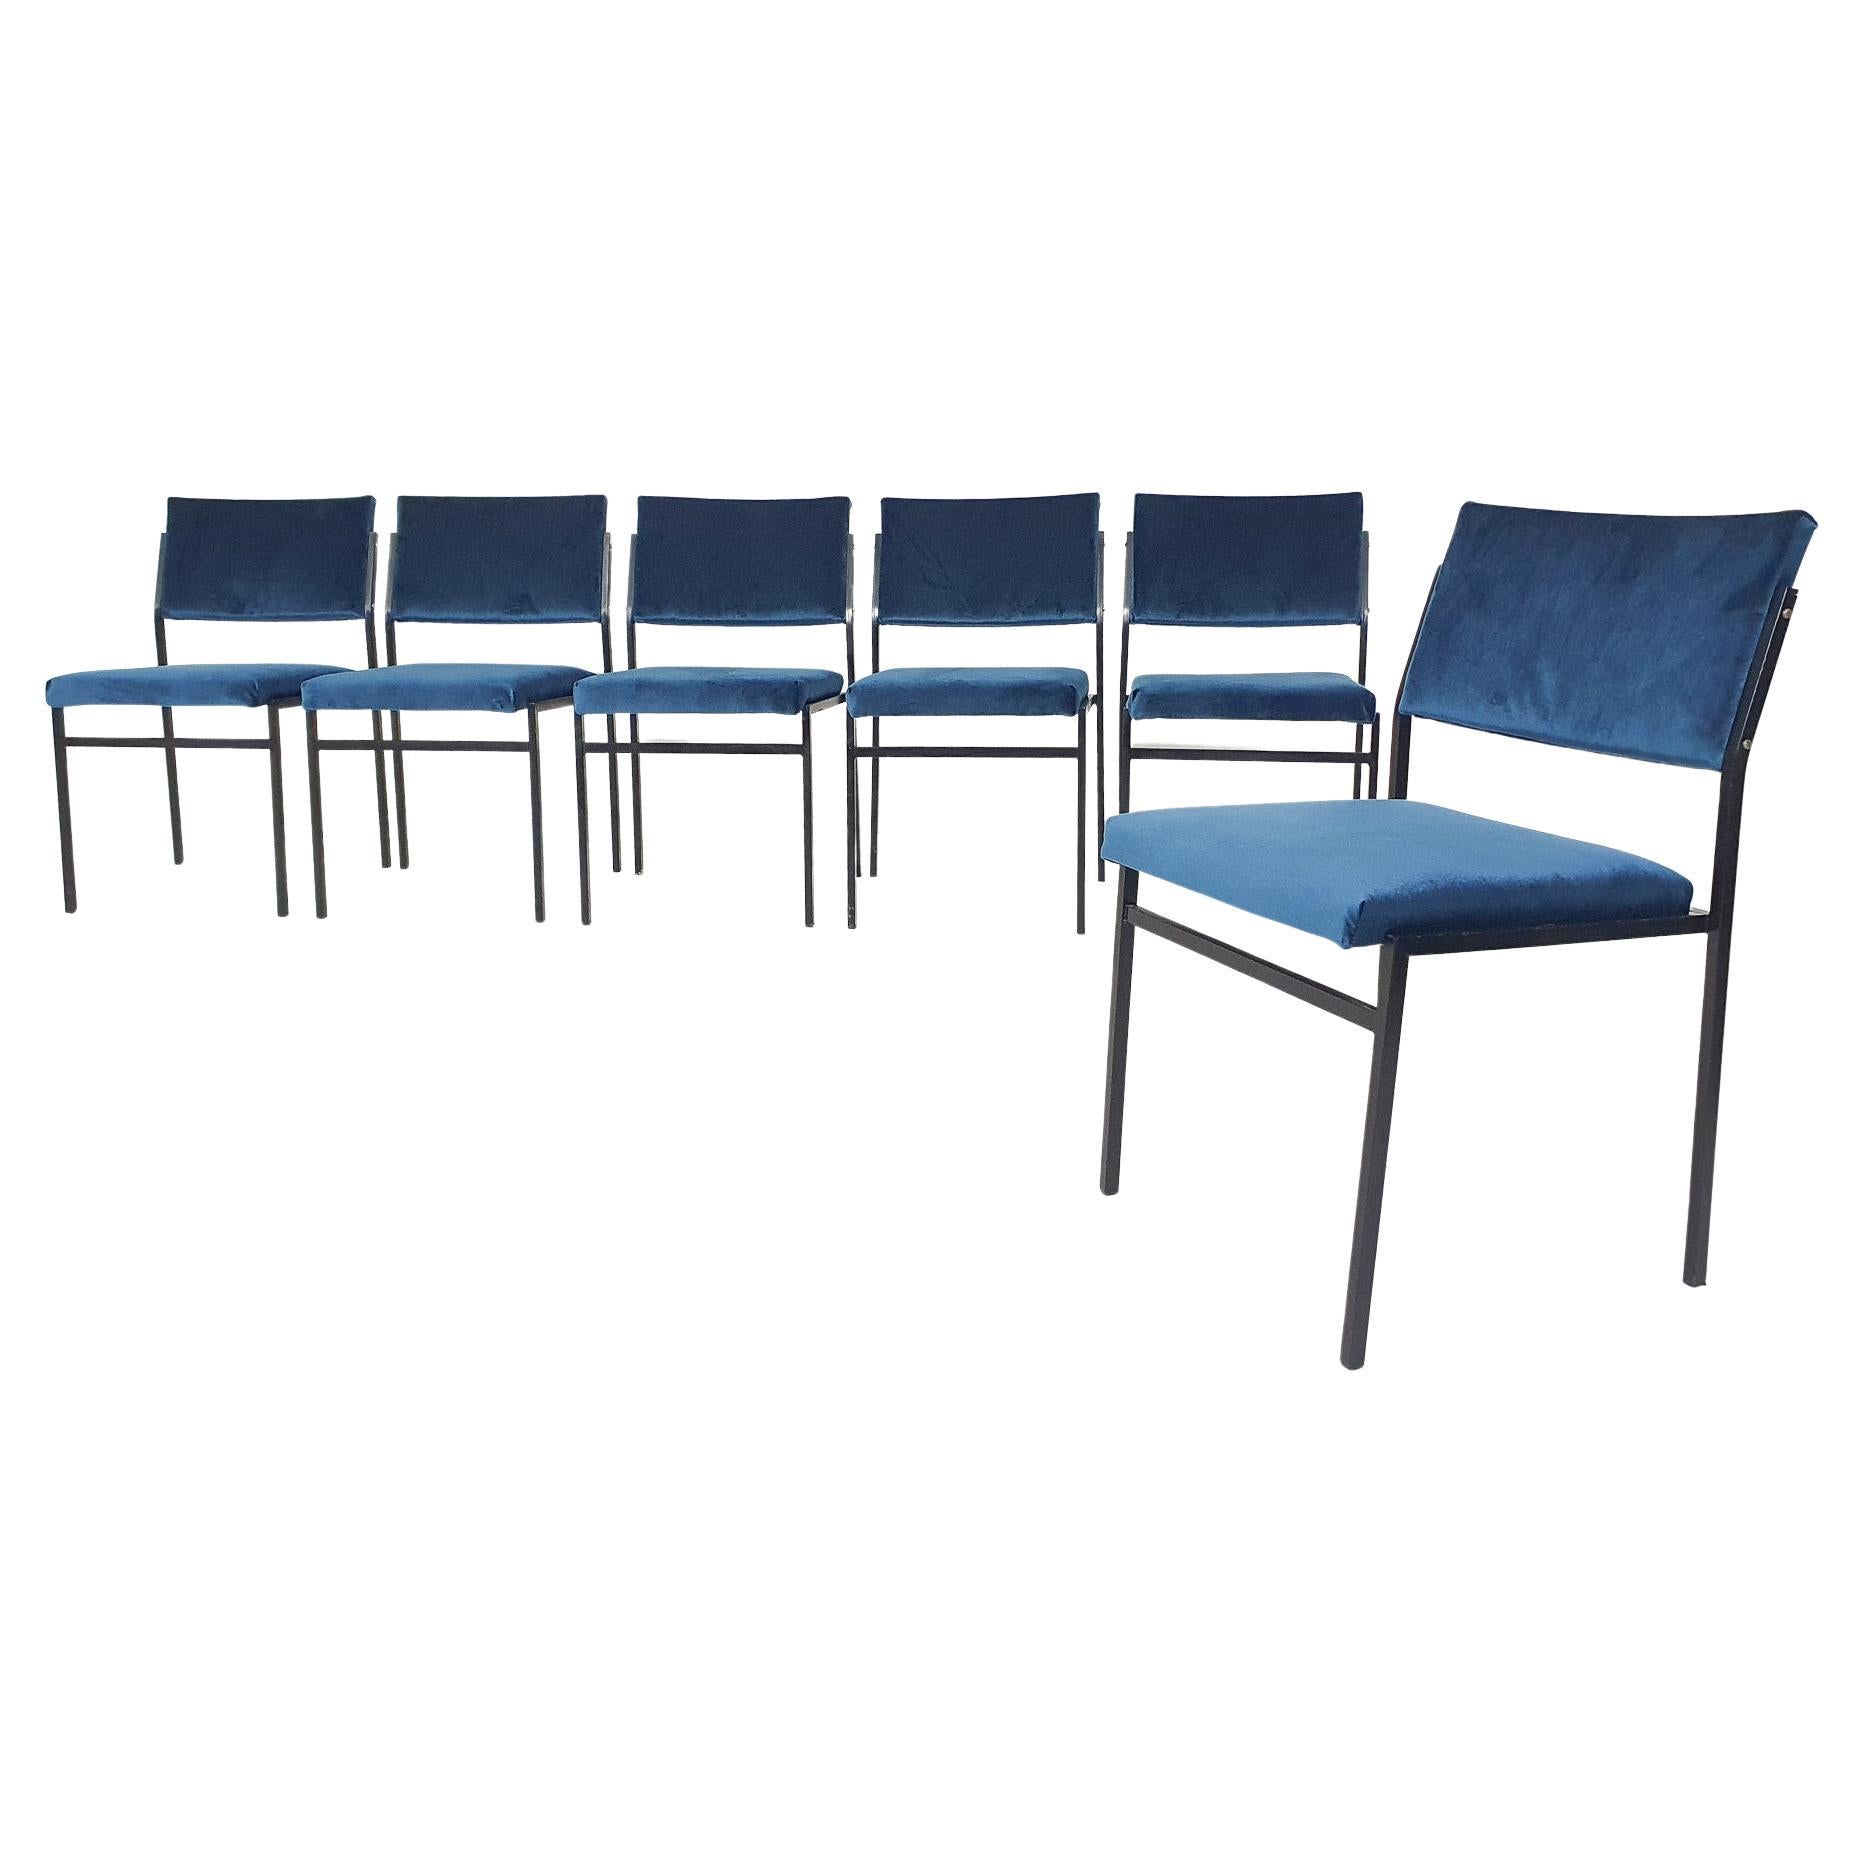 Set of 6 vintage metal stacking chairs in blue velvet The Netherlands 1960's For Sale